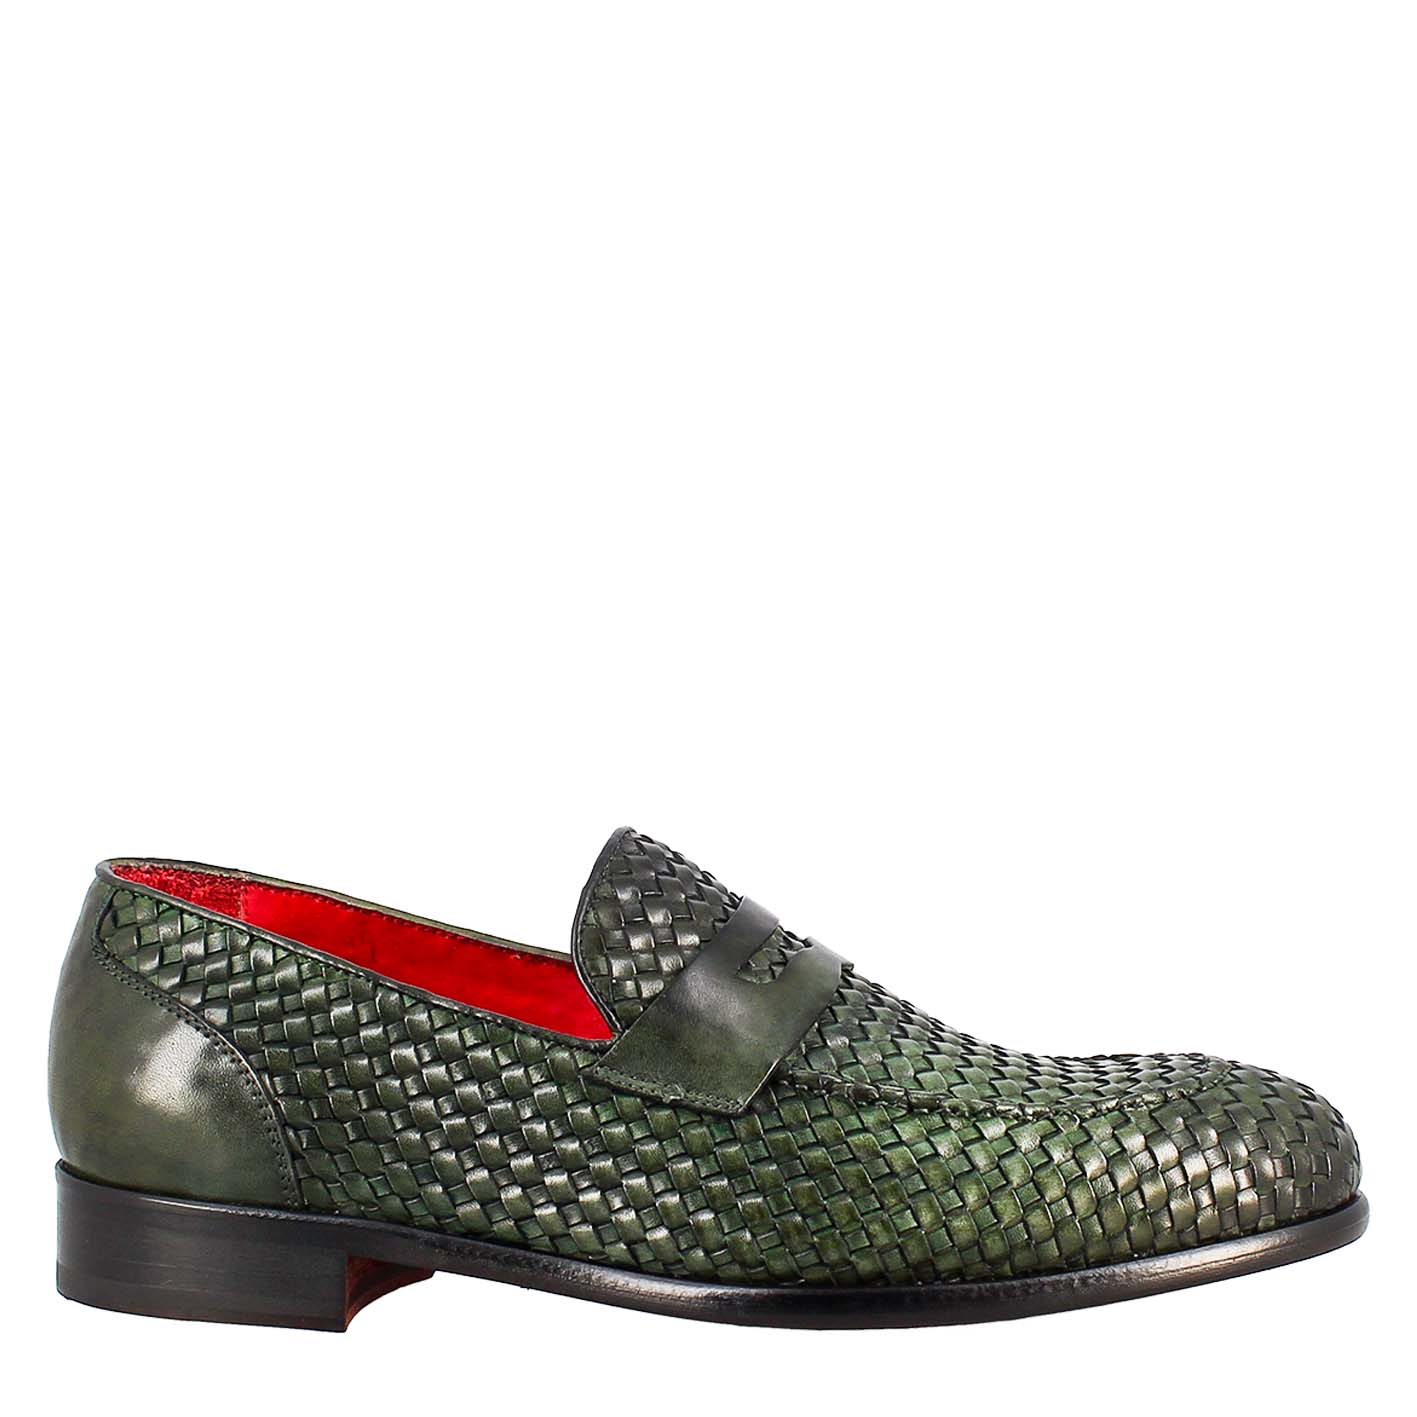 Green Moccasin in Woven Grain Leather